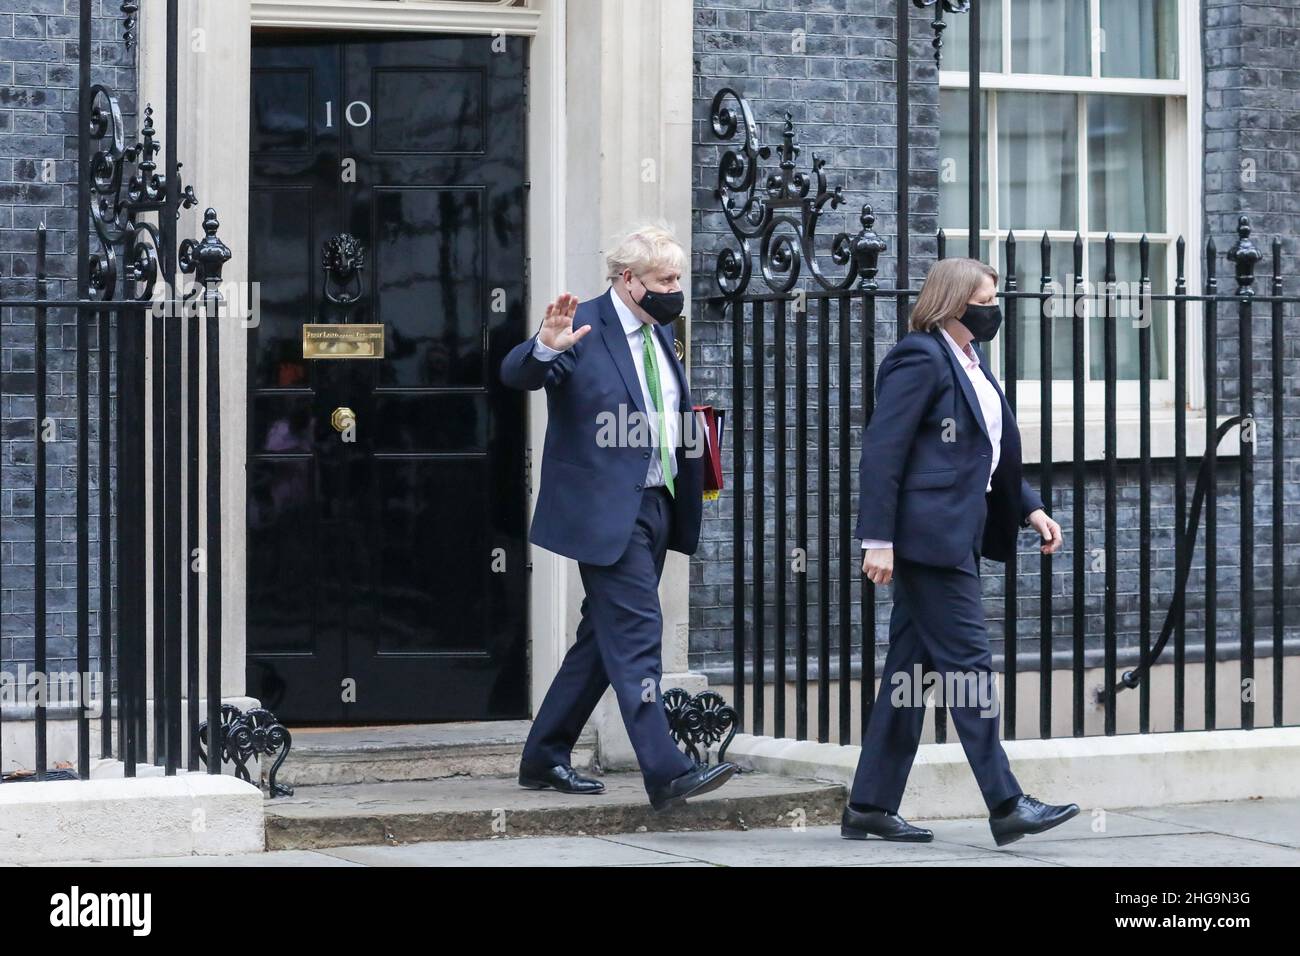 UK Prime Minister, Boris Johnson leaves his office at 10 Downing Street to attend the weekly Prime Minister Questions, during which he is expected to deliver an update regarding the lift of COVID related restrictions on the nation. Stock Photo